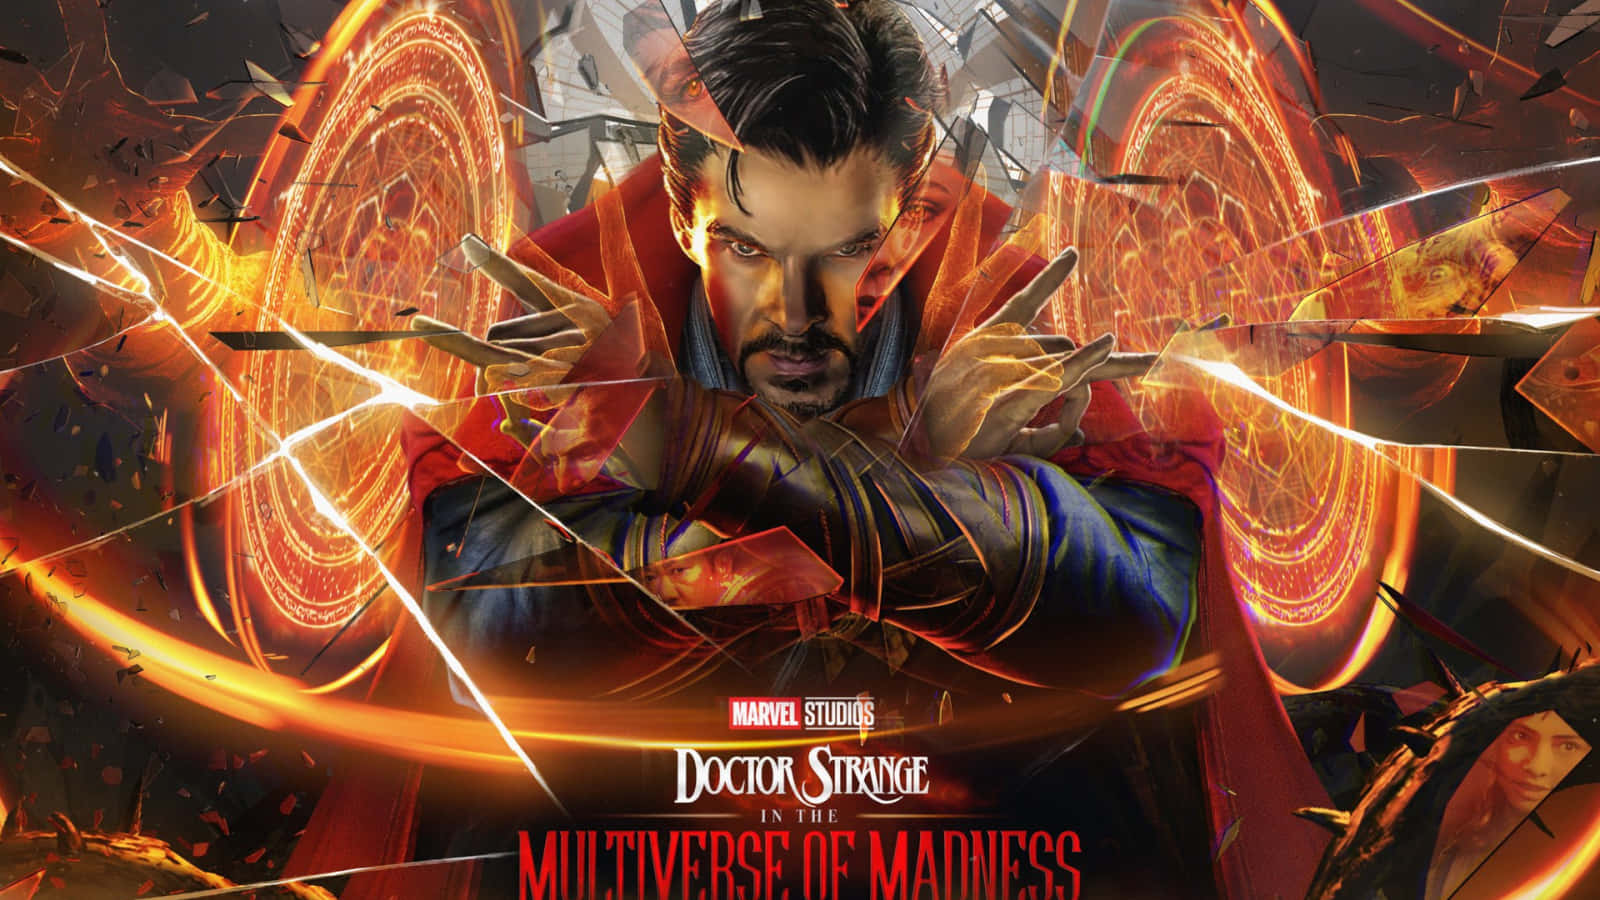 Image  Dr. Stephen Strange casts a powerful spell